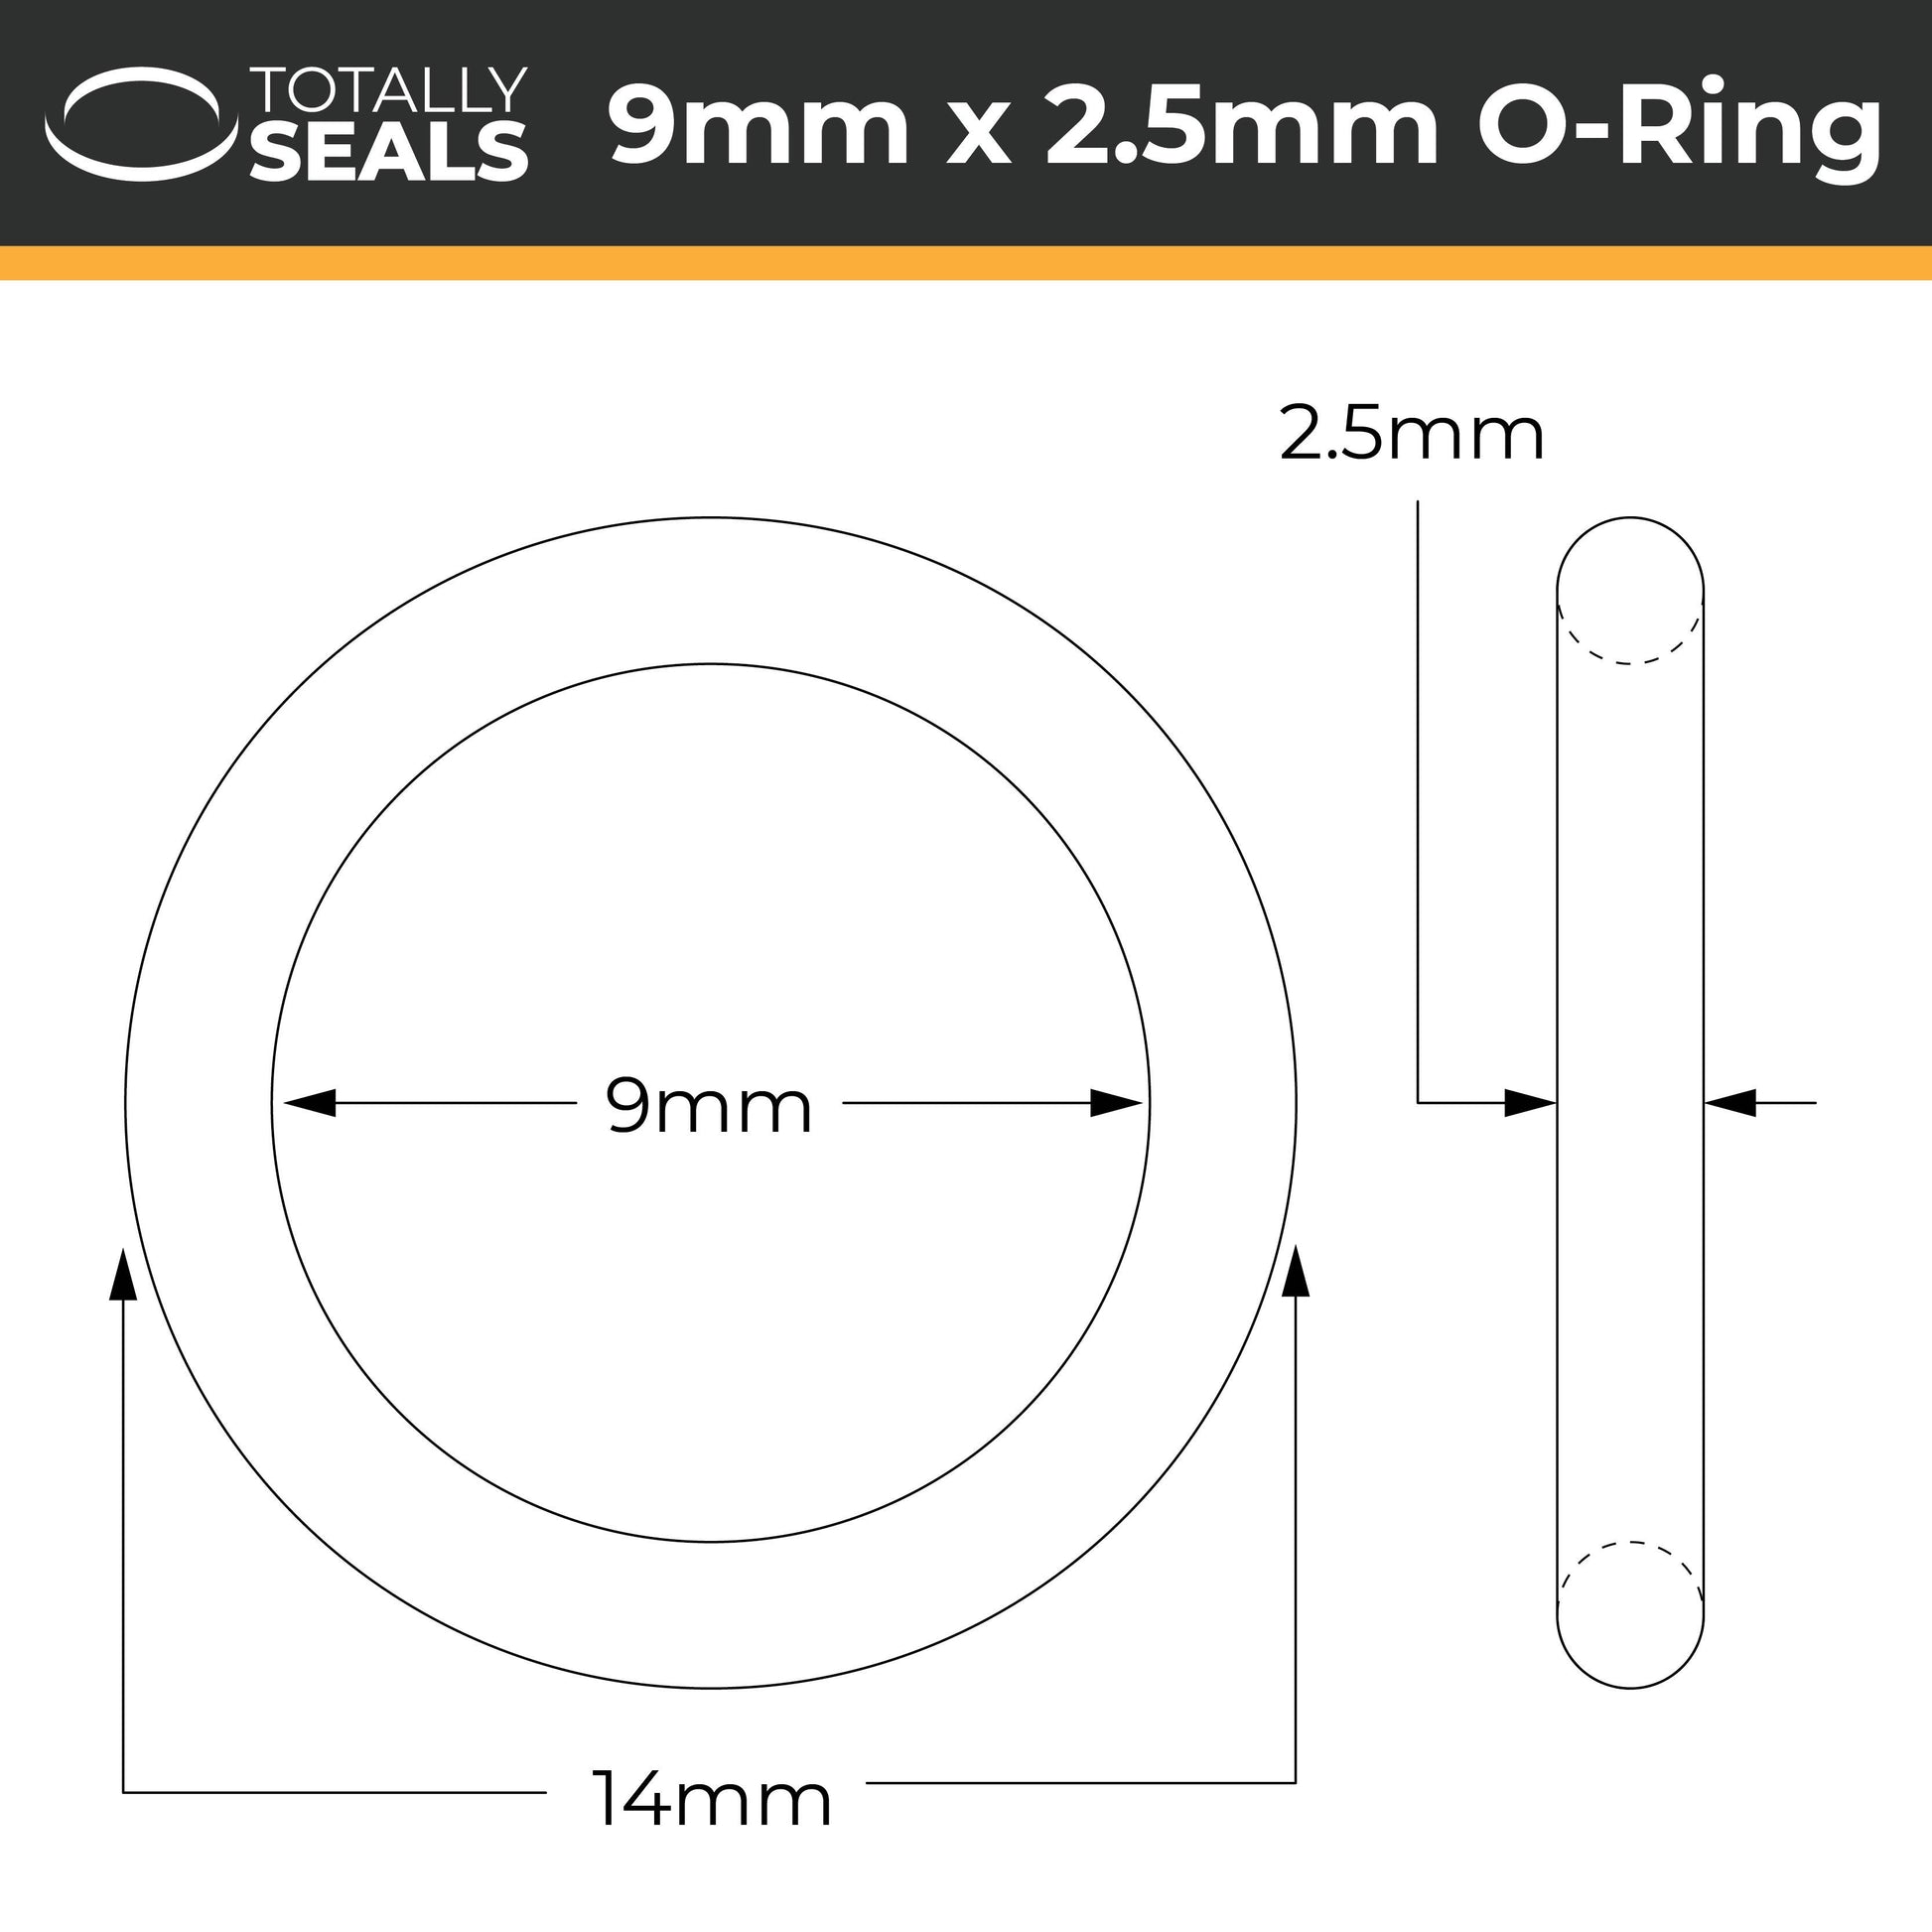 9mm x 2.5mm (14mm OD) Nitrile O-Rings - Totally Seals®